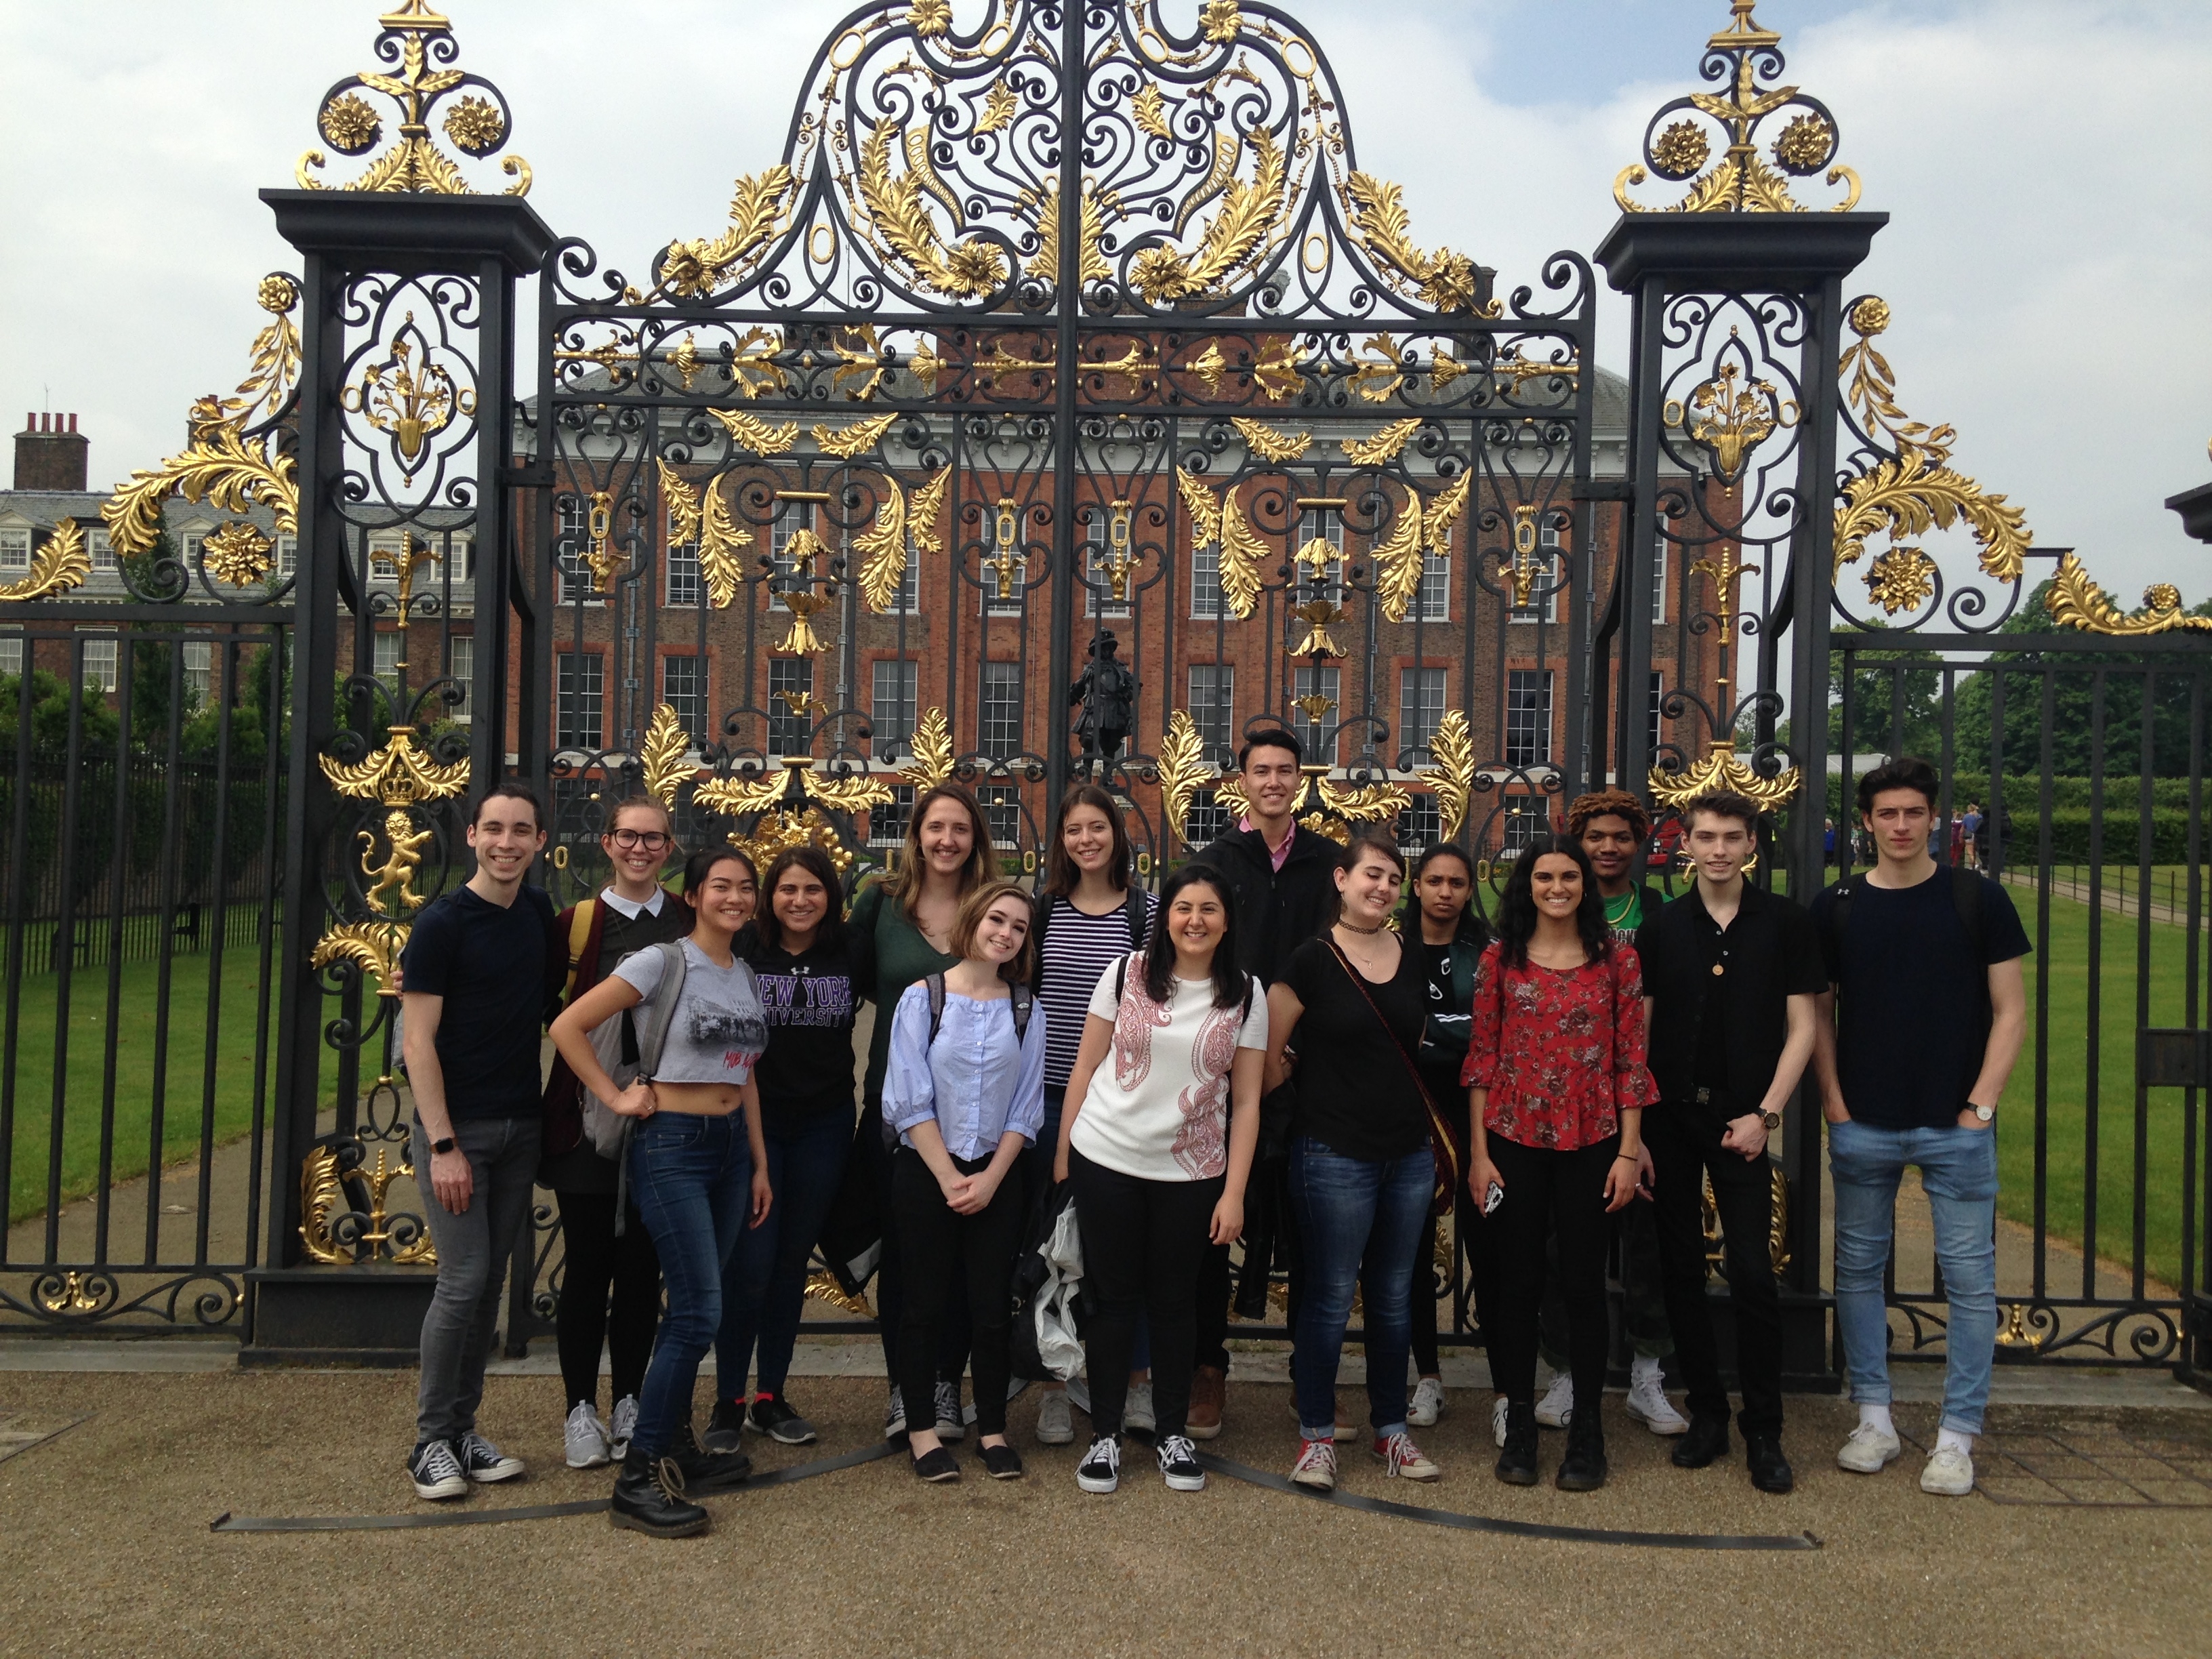 Group photo of the summer 2018 Producing in London class in front of Kensington Palace.